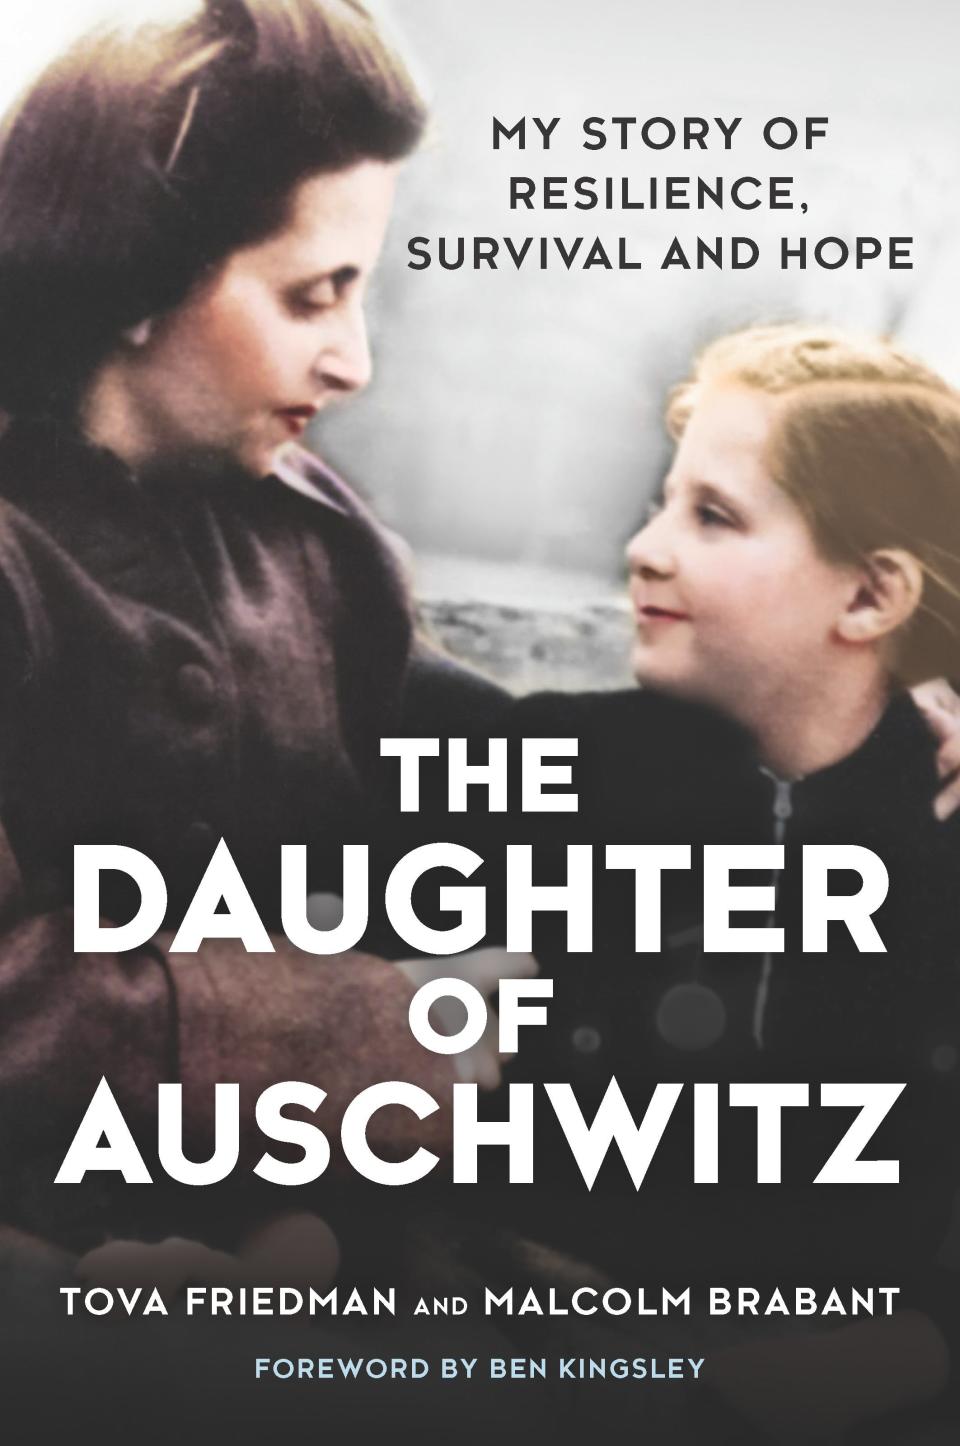 Tova Friedman and her mother on the cover of her memoir, "The Daughter of Auschwitz."